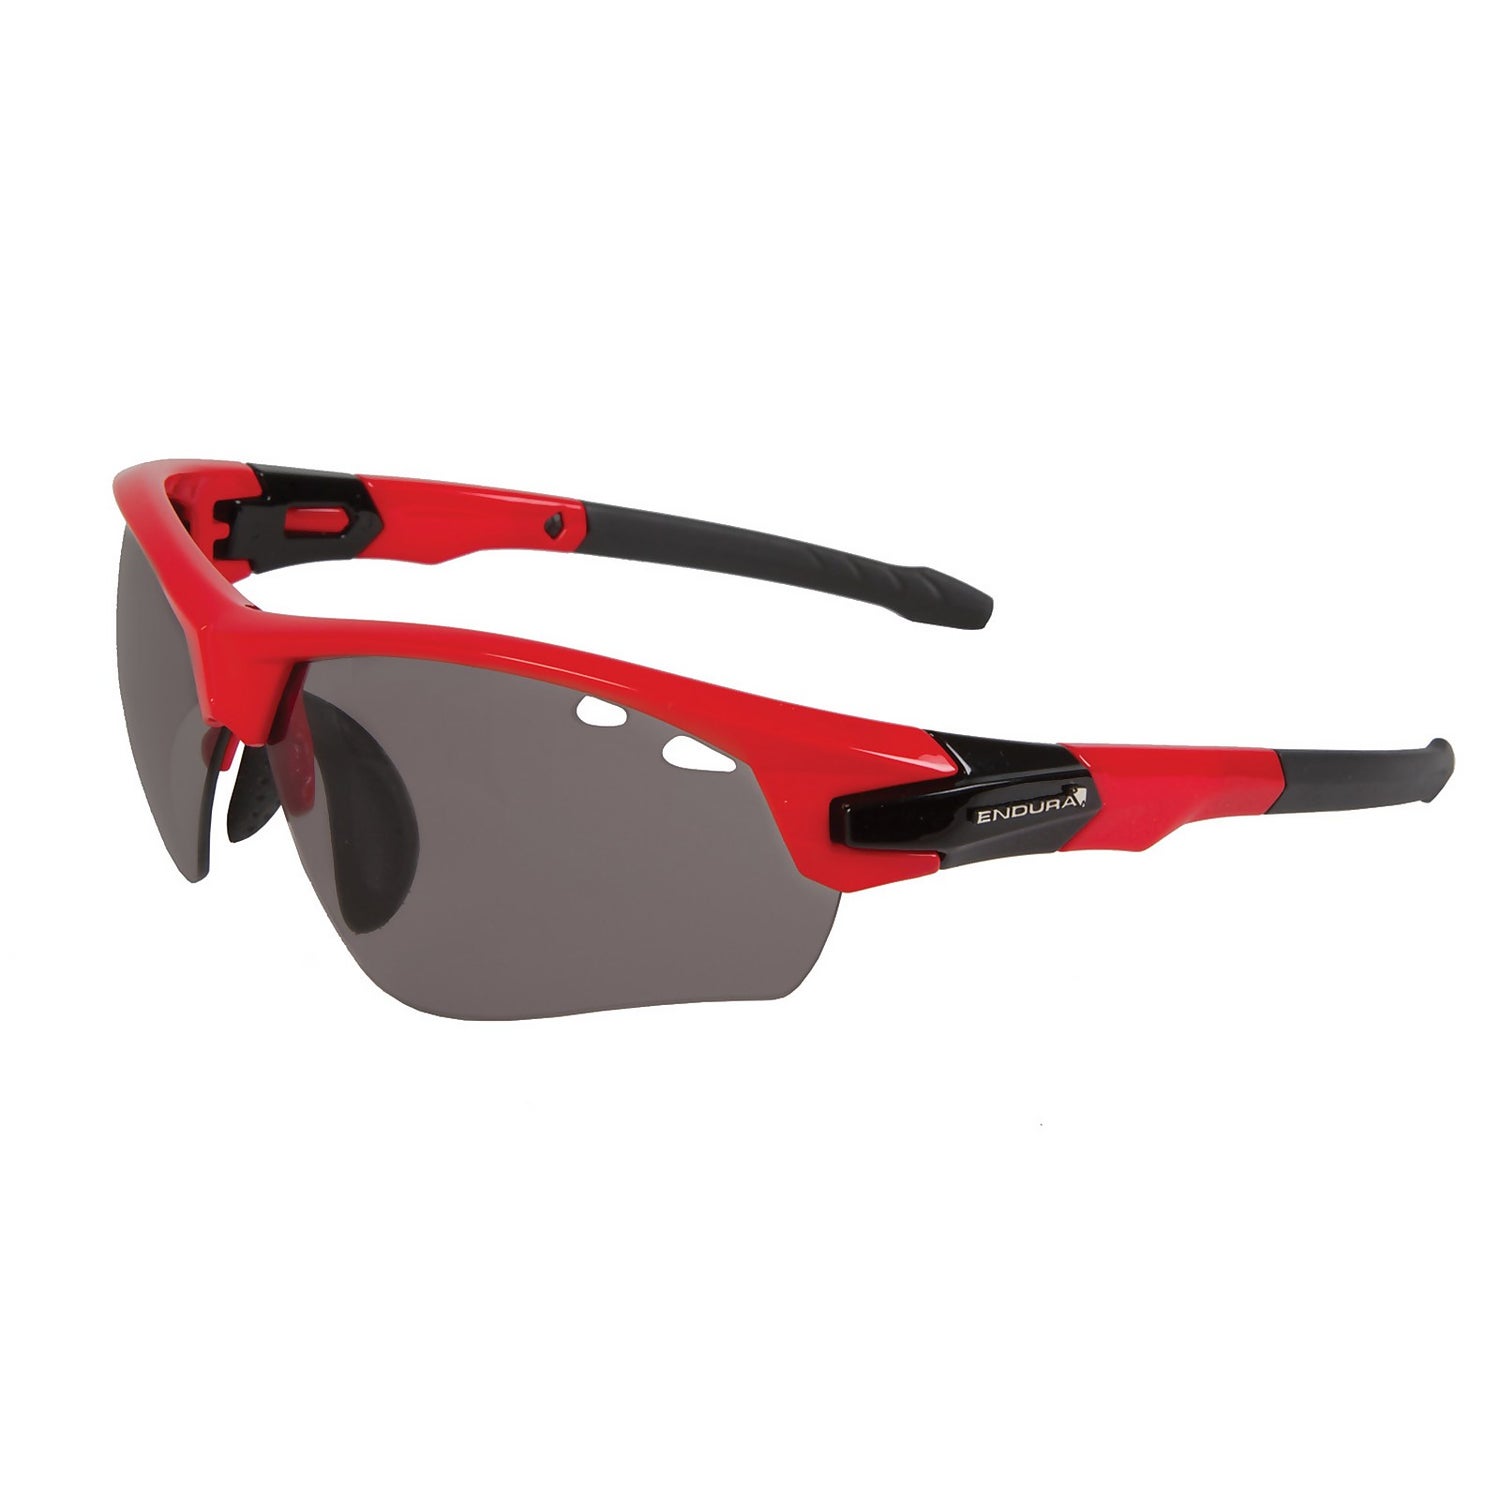 Men's Char Glasses - Red - One Size